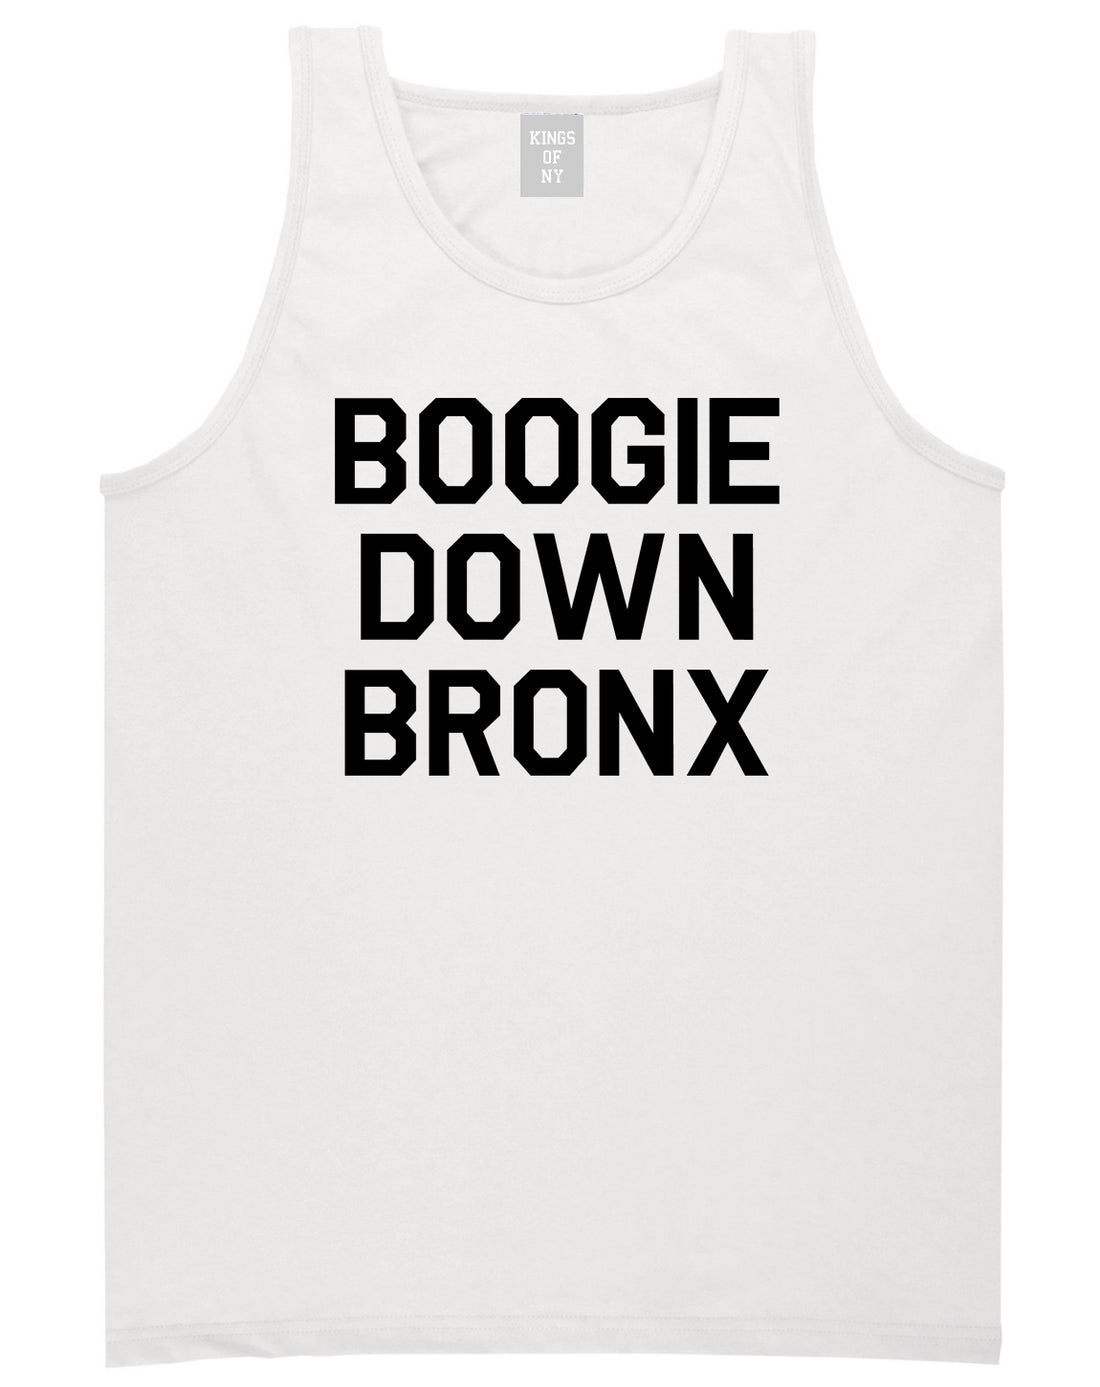 Boogie Down Bronx Mens Tank Top Shirt White by Kings Of NY